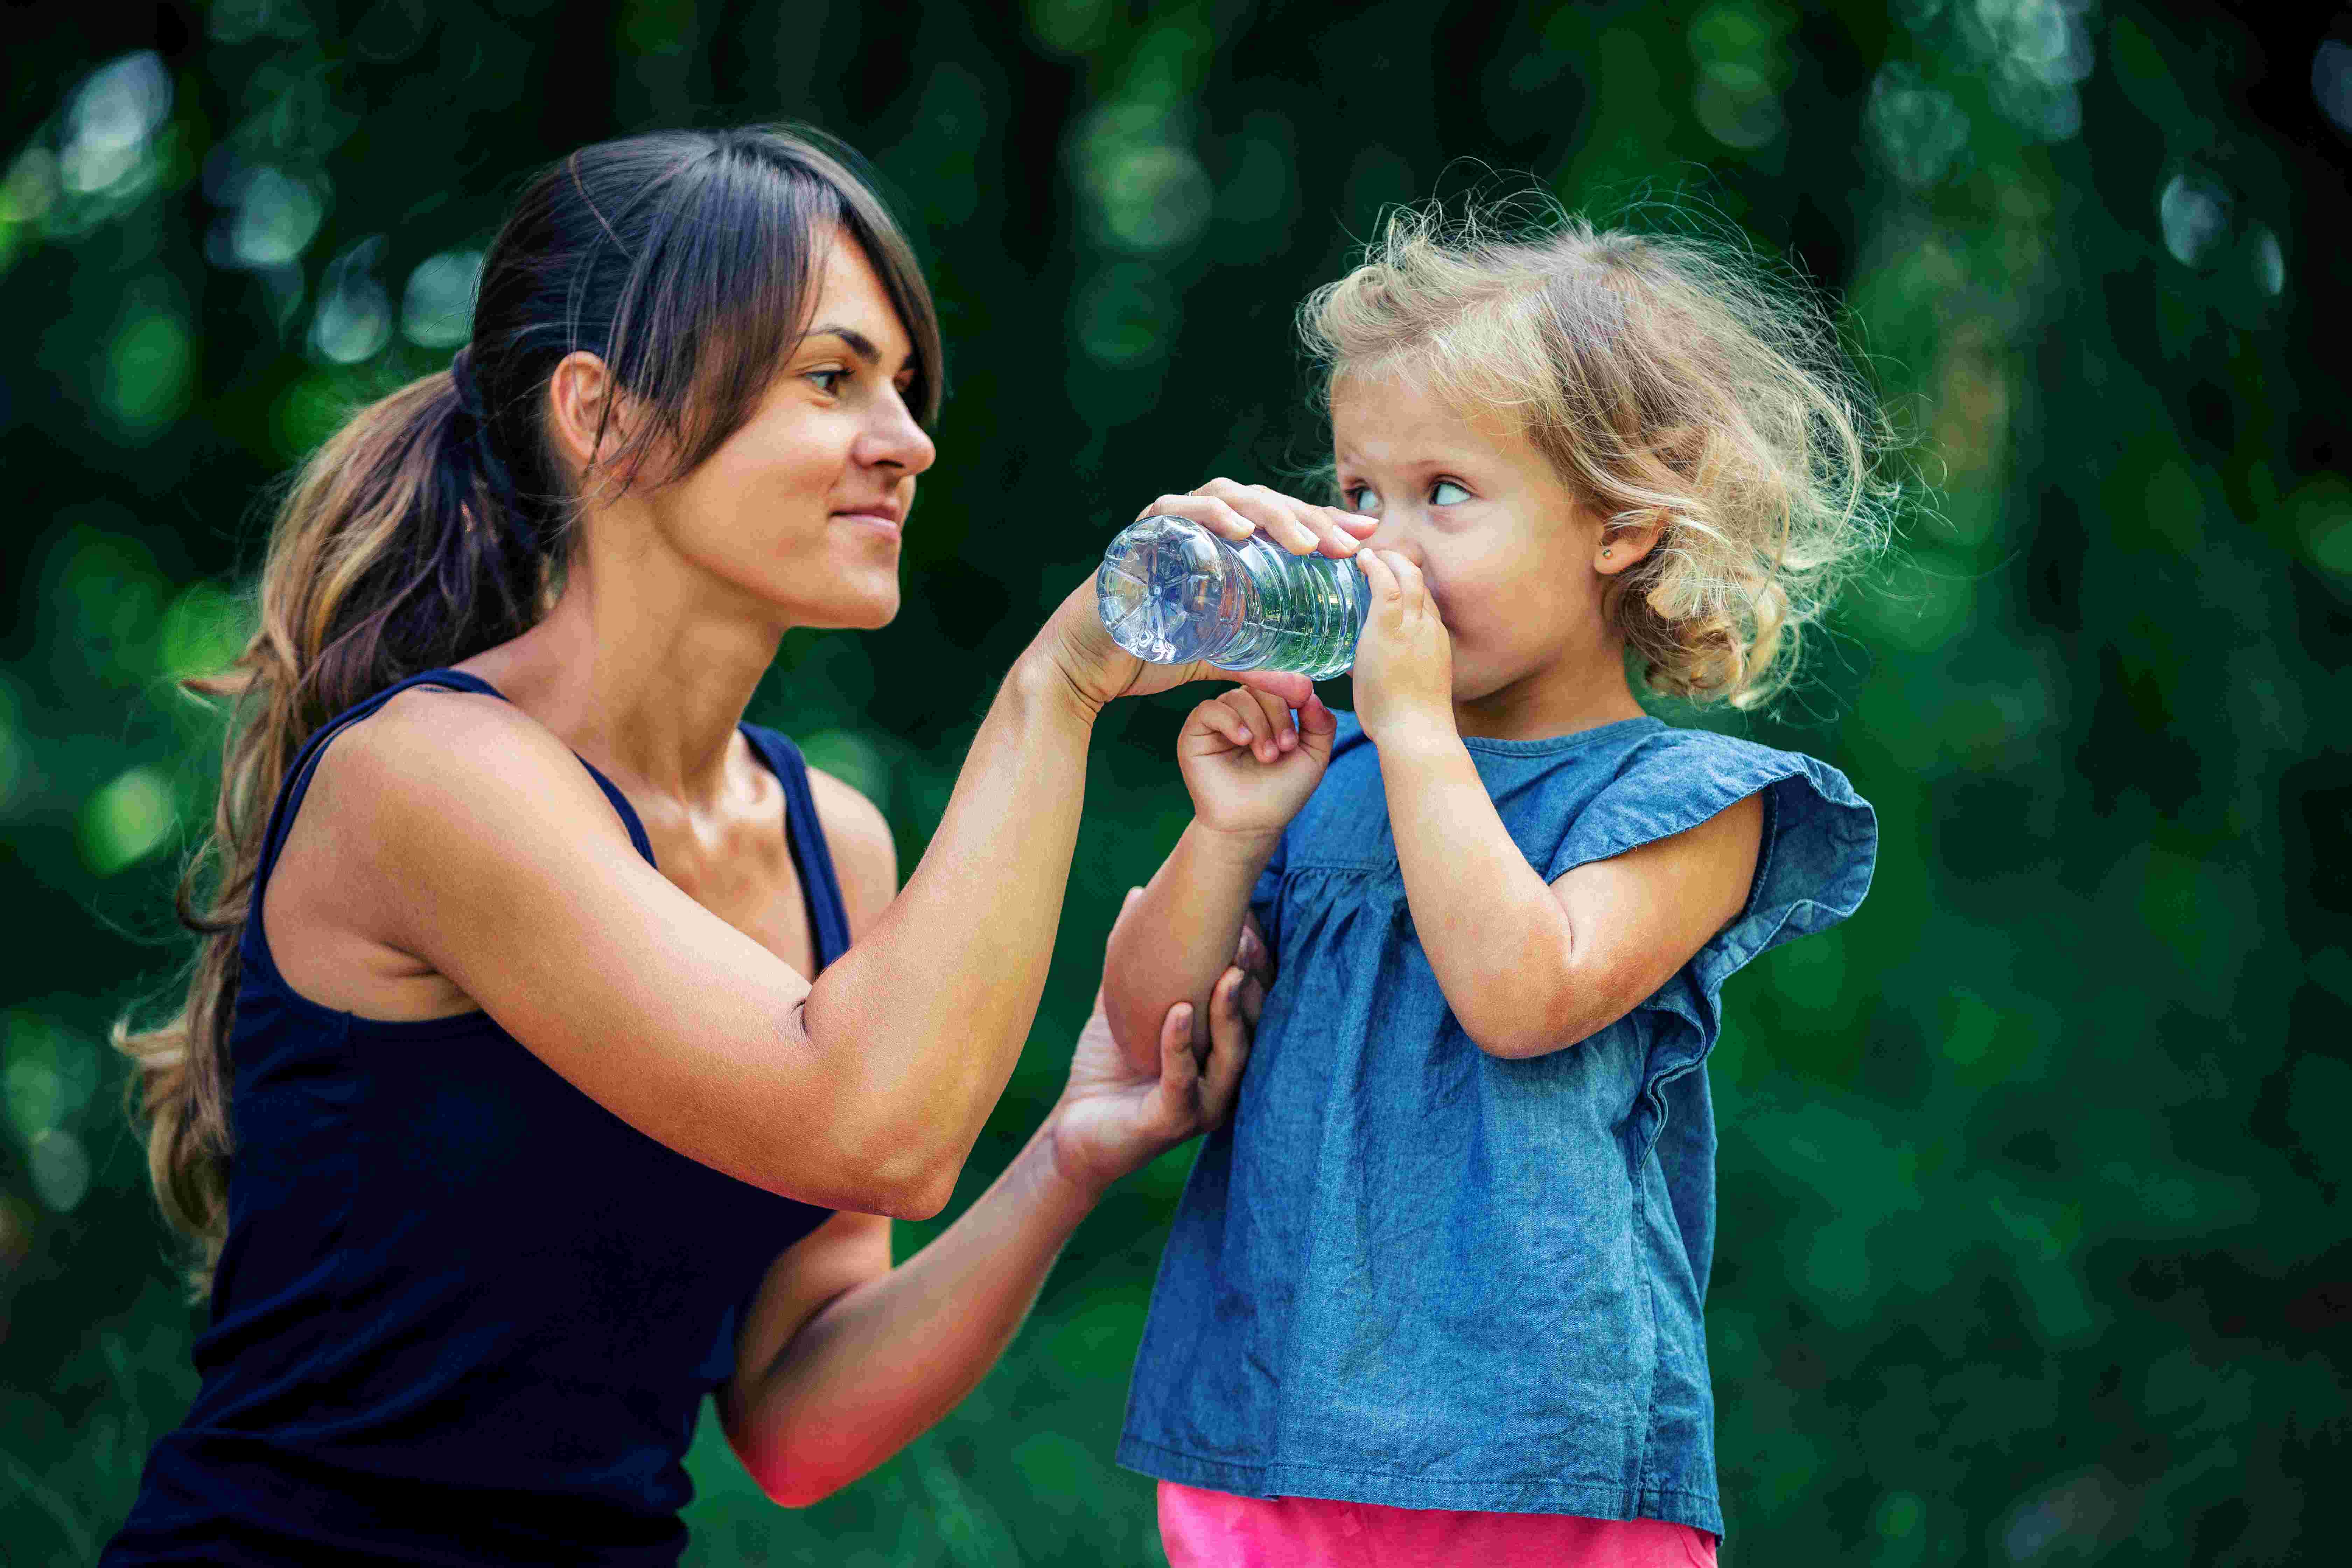 woman gives young girl a drink of water